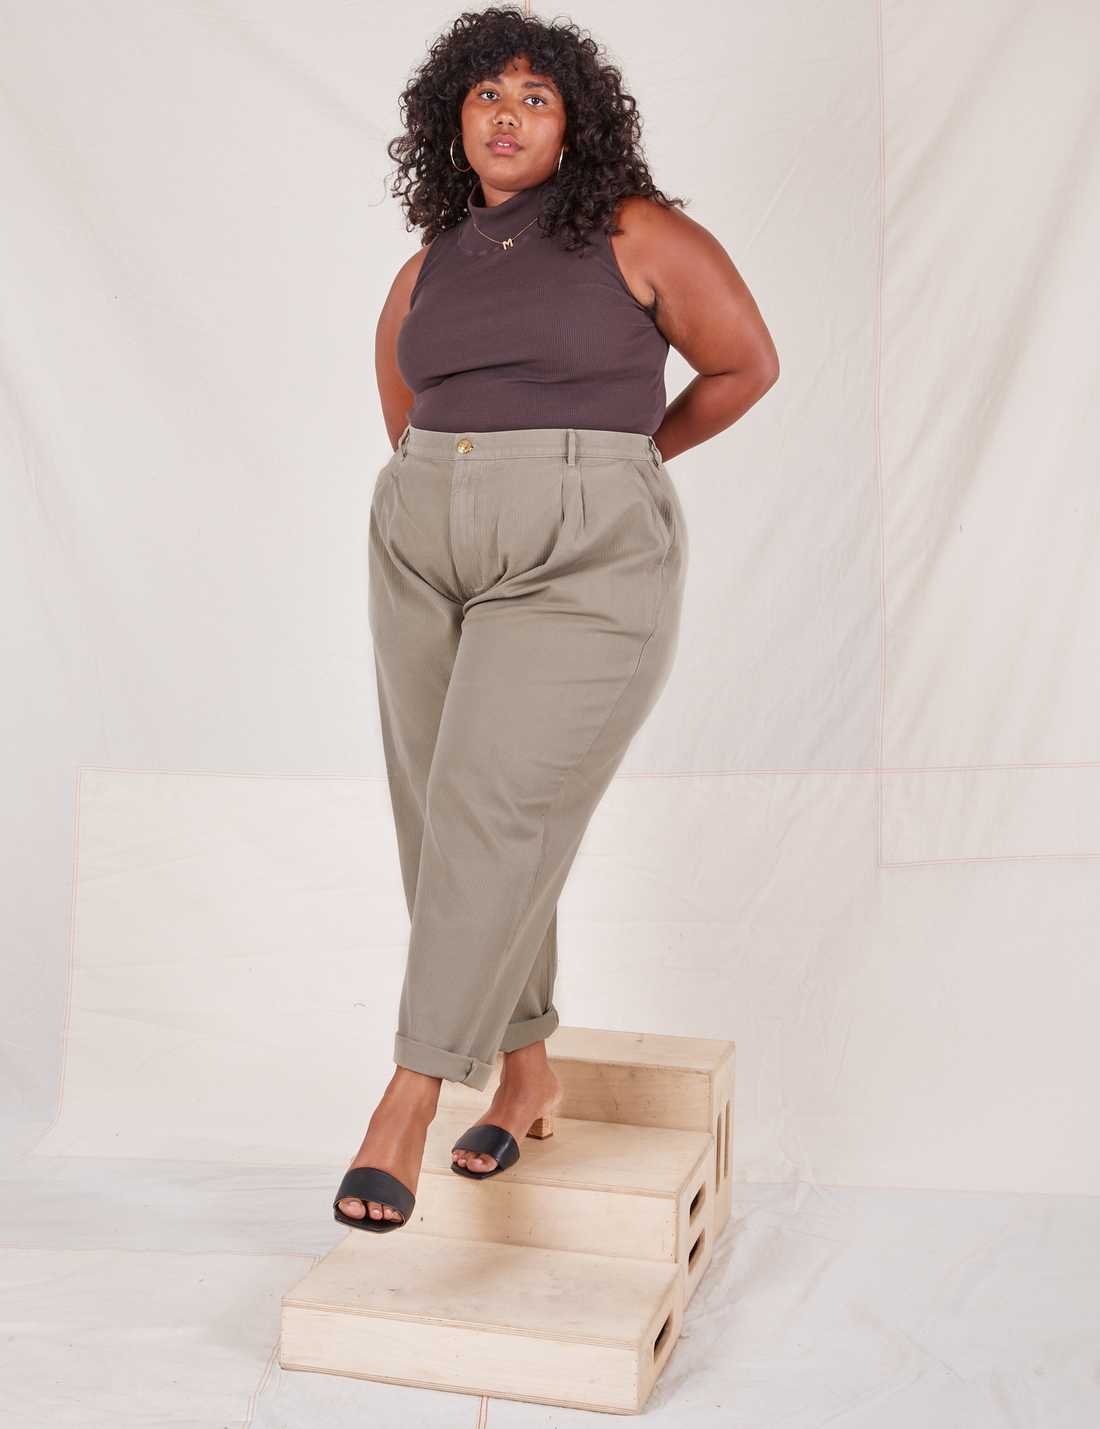 Morgan is 5'5" and wearing 1XL Heritage Trousers in Khaki Grey paired with espresso brown Sleeveless Turtleneck